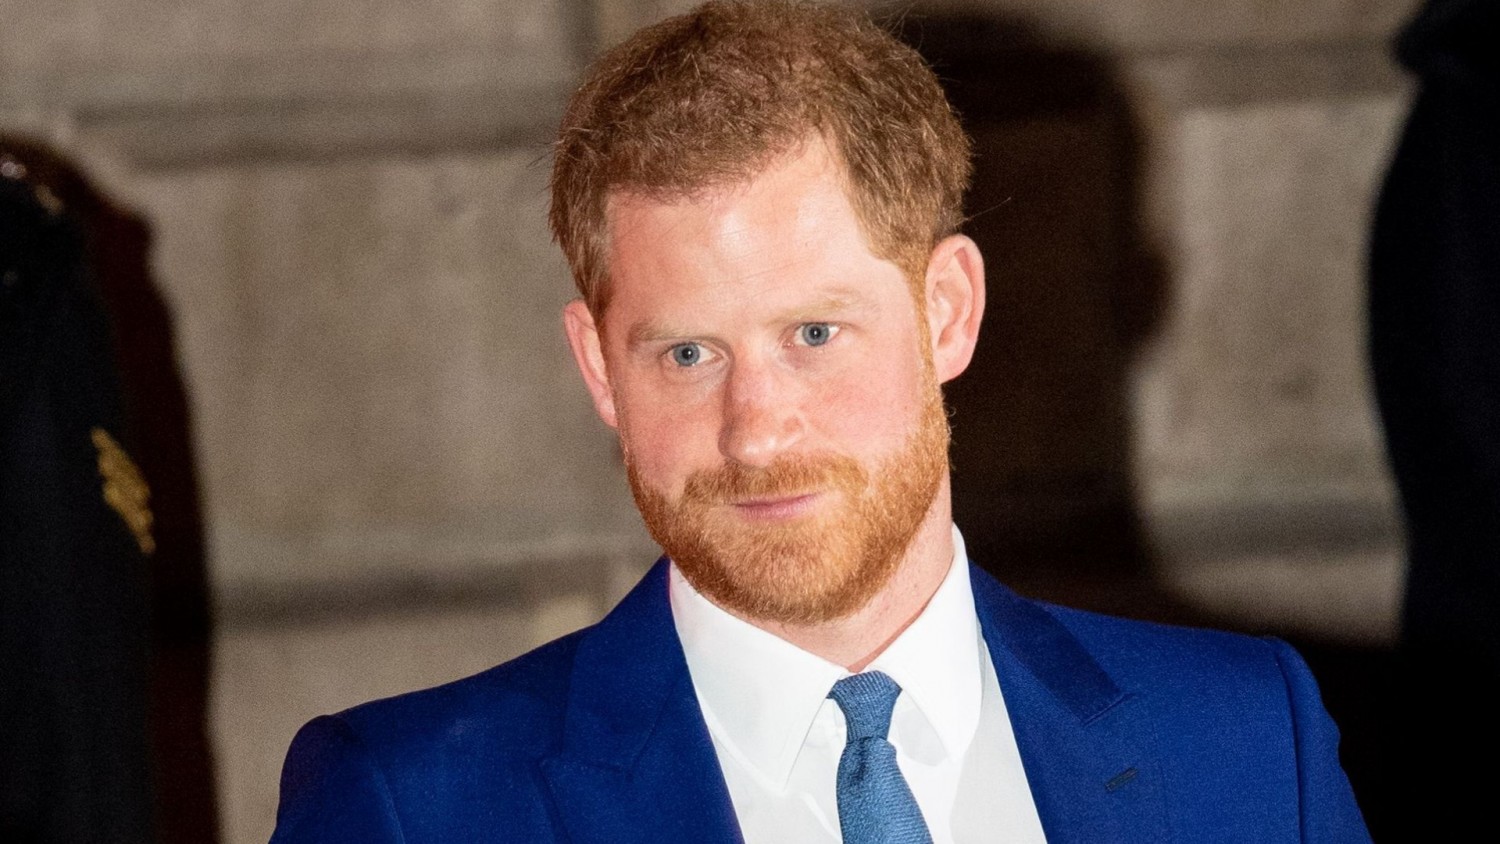 Prince Harry attends the 4th Endeavour Prince Harry Image: Shutterstock